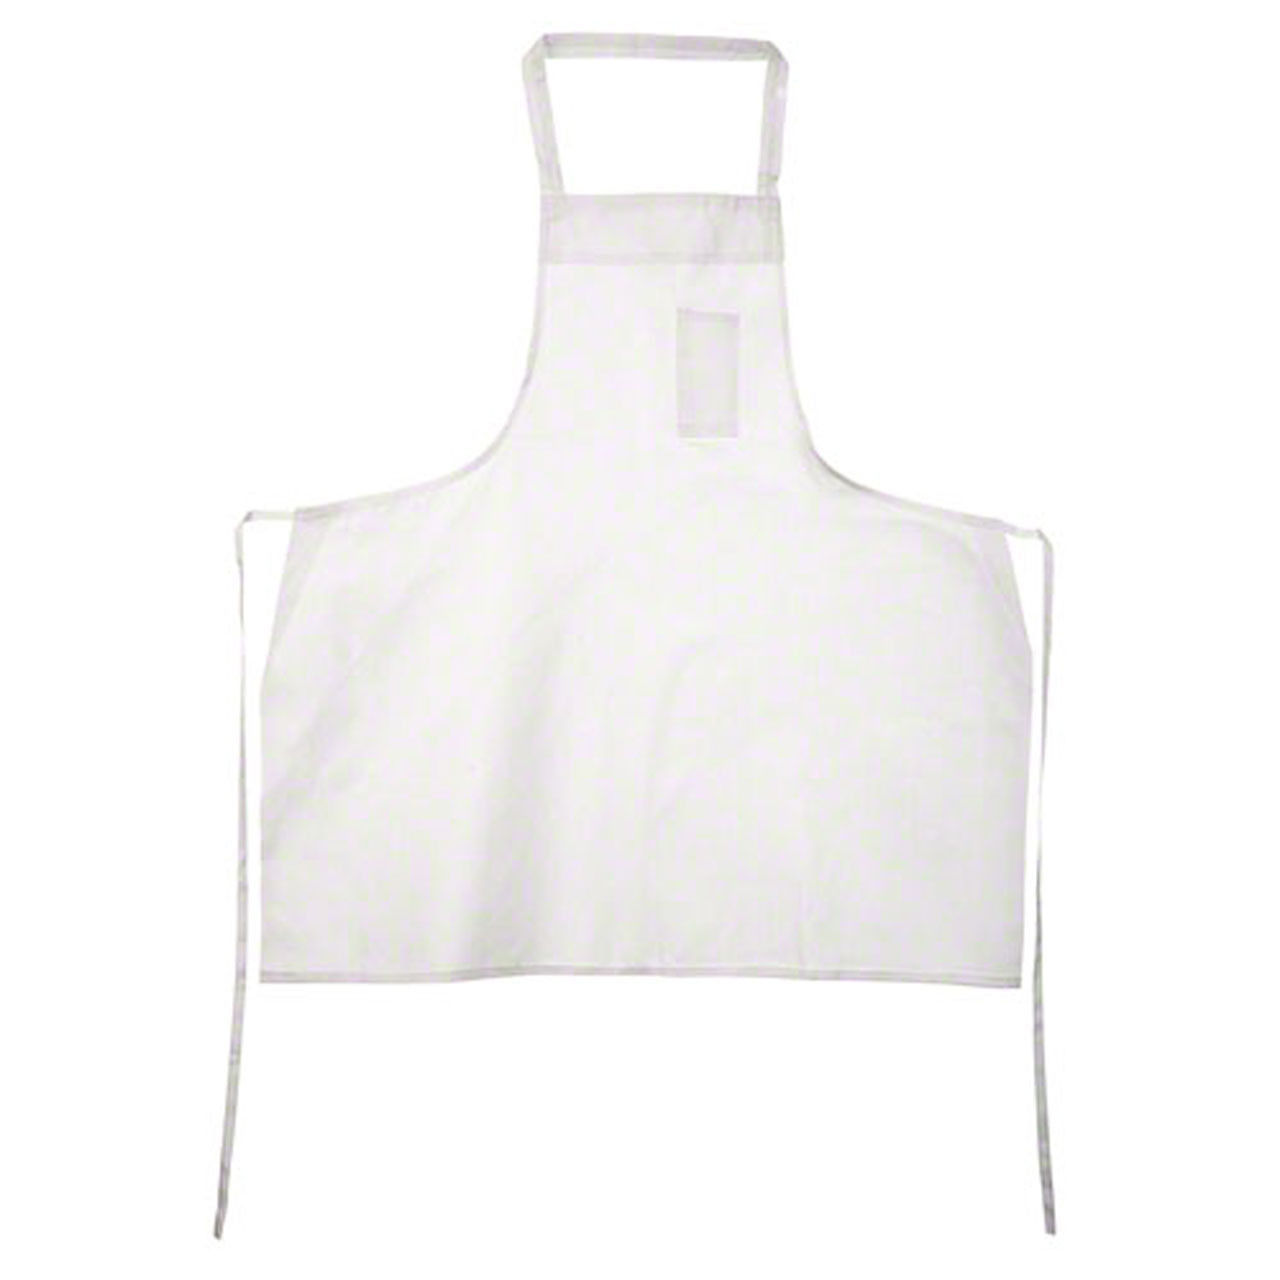 What materials are cheap white aprons, specifically White Economy Bib Aprons, made of?